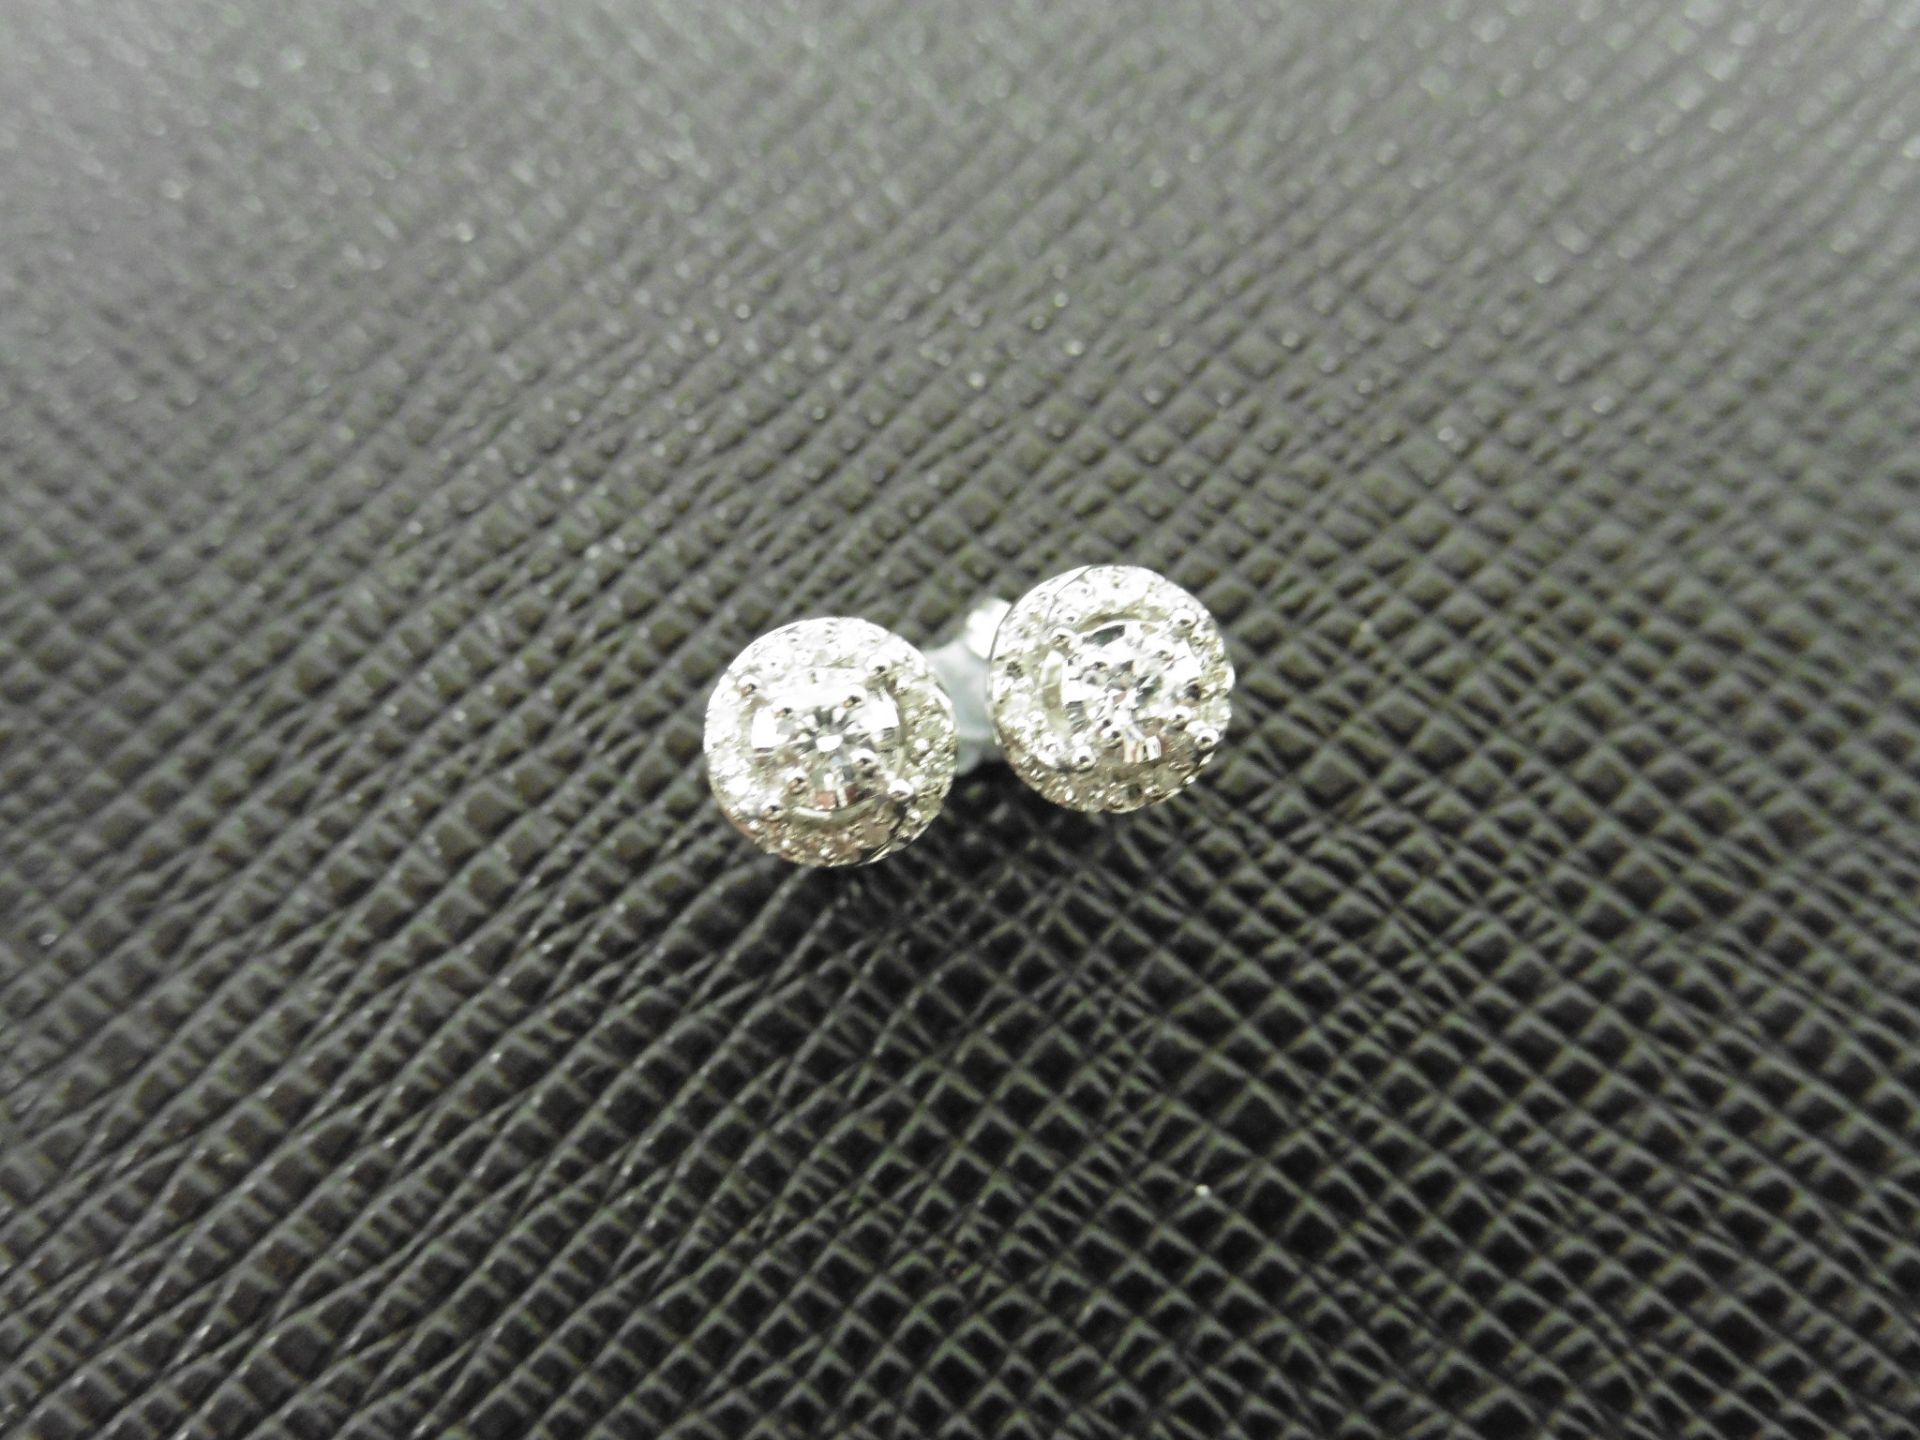 0.25ct diamond set stud earrings in 9ct white gold. Small brilliant cut diamonds. H colour and I1- - Image 2 of 3